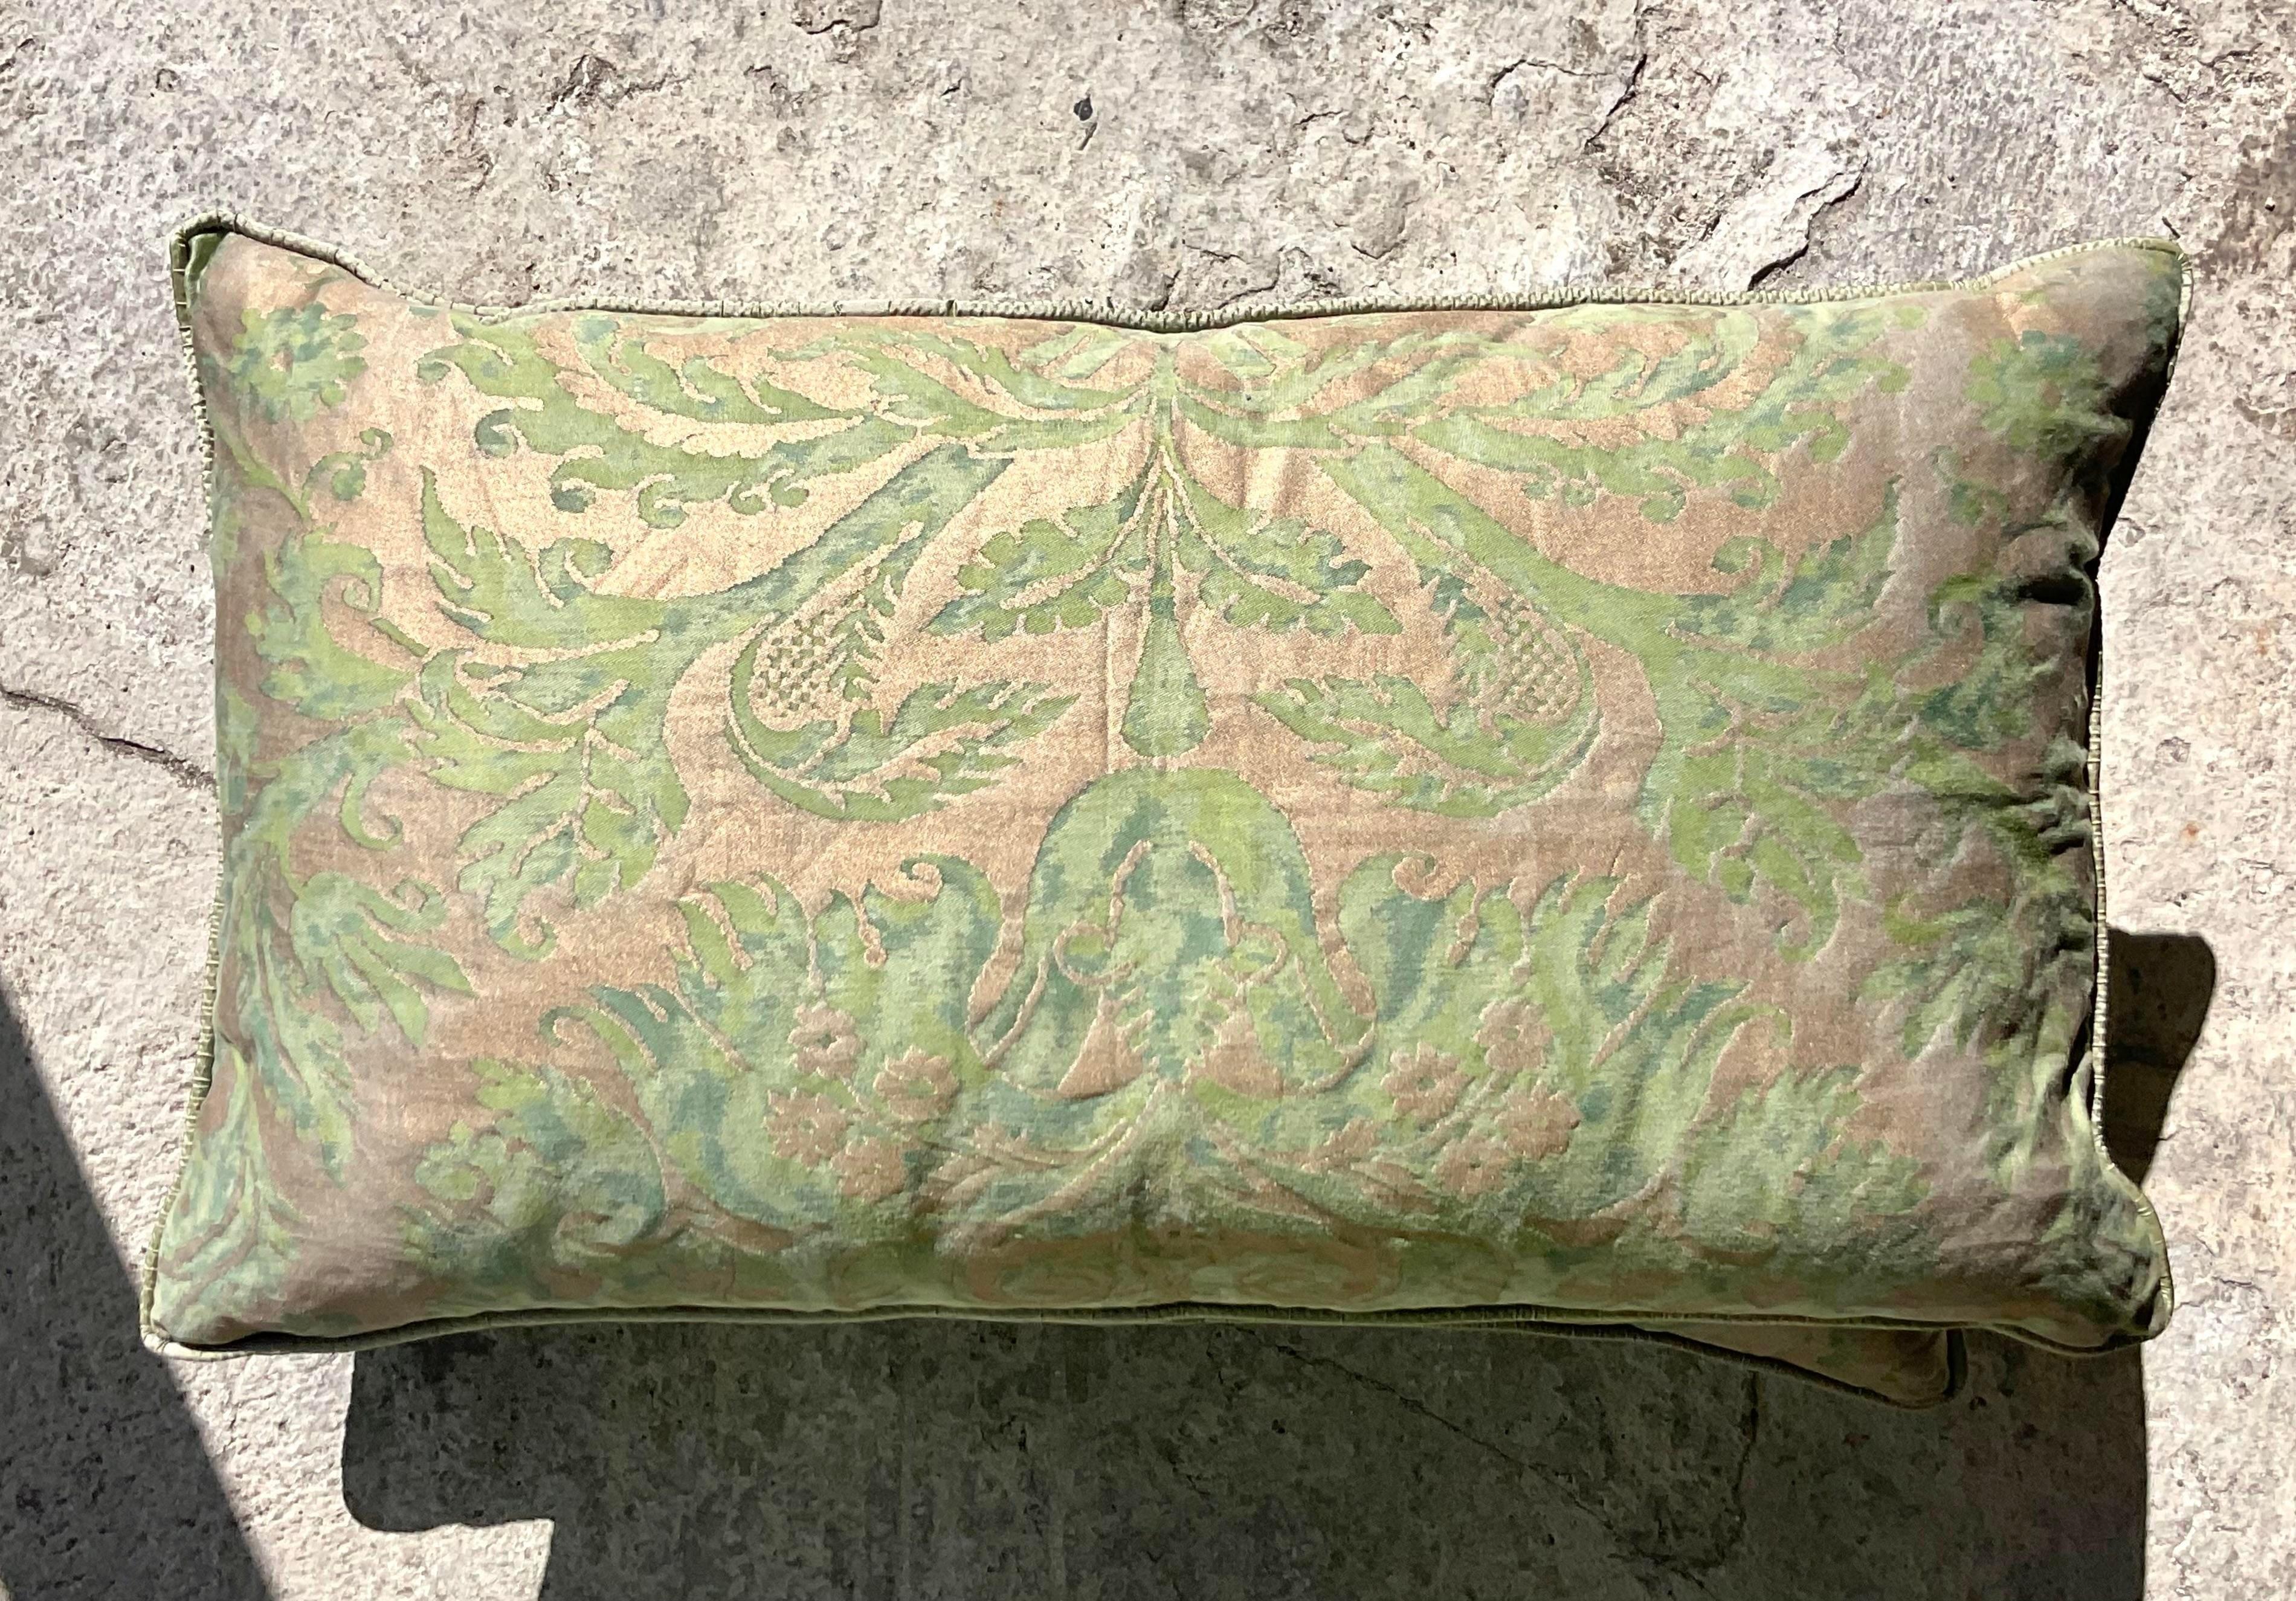 A fabulous pair of vintage Regency throw pillows. Made with the iconic Fortuny flier de lys brocade. Acquired from a Palm Beach estate.